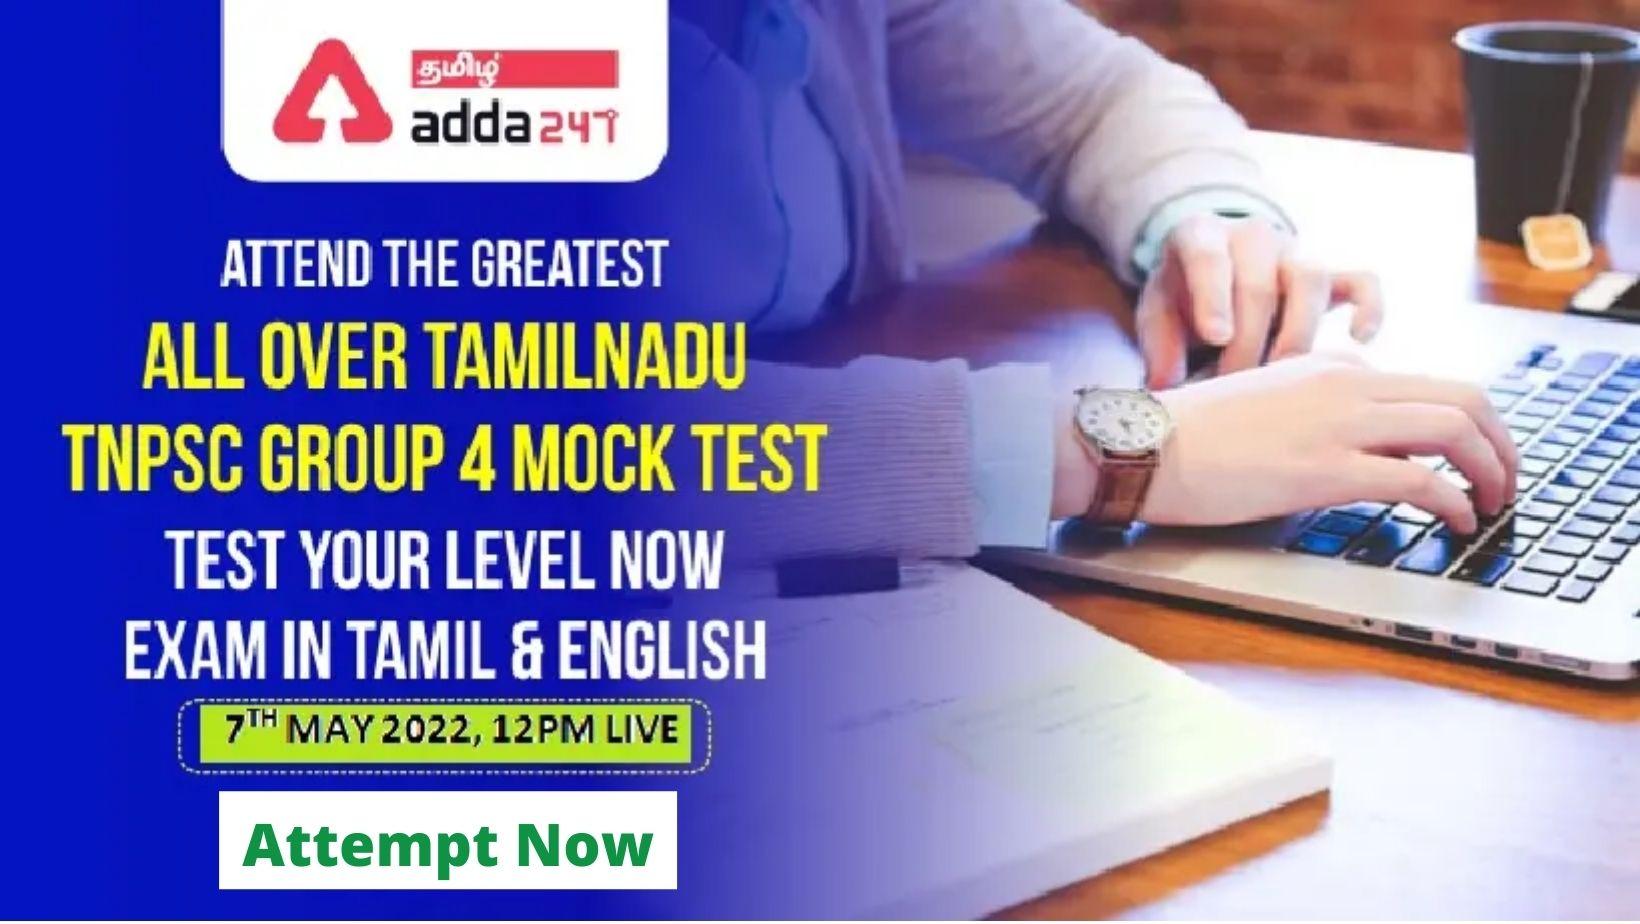 All Over Tamil Nadu Free TNPSC Group 4 Mock Test 2022 on 7 May 2022 - Attempt Now